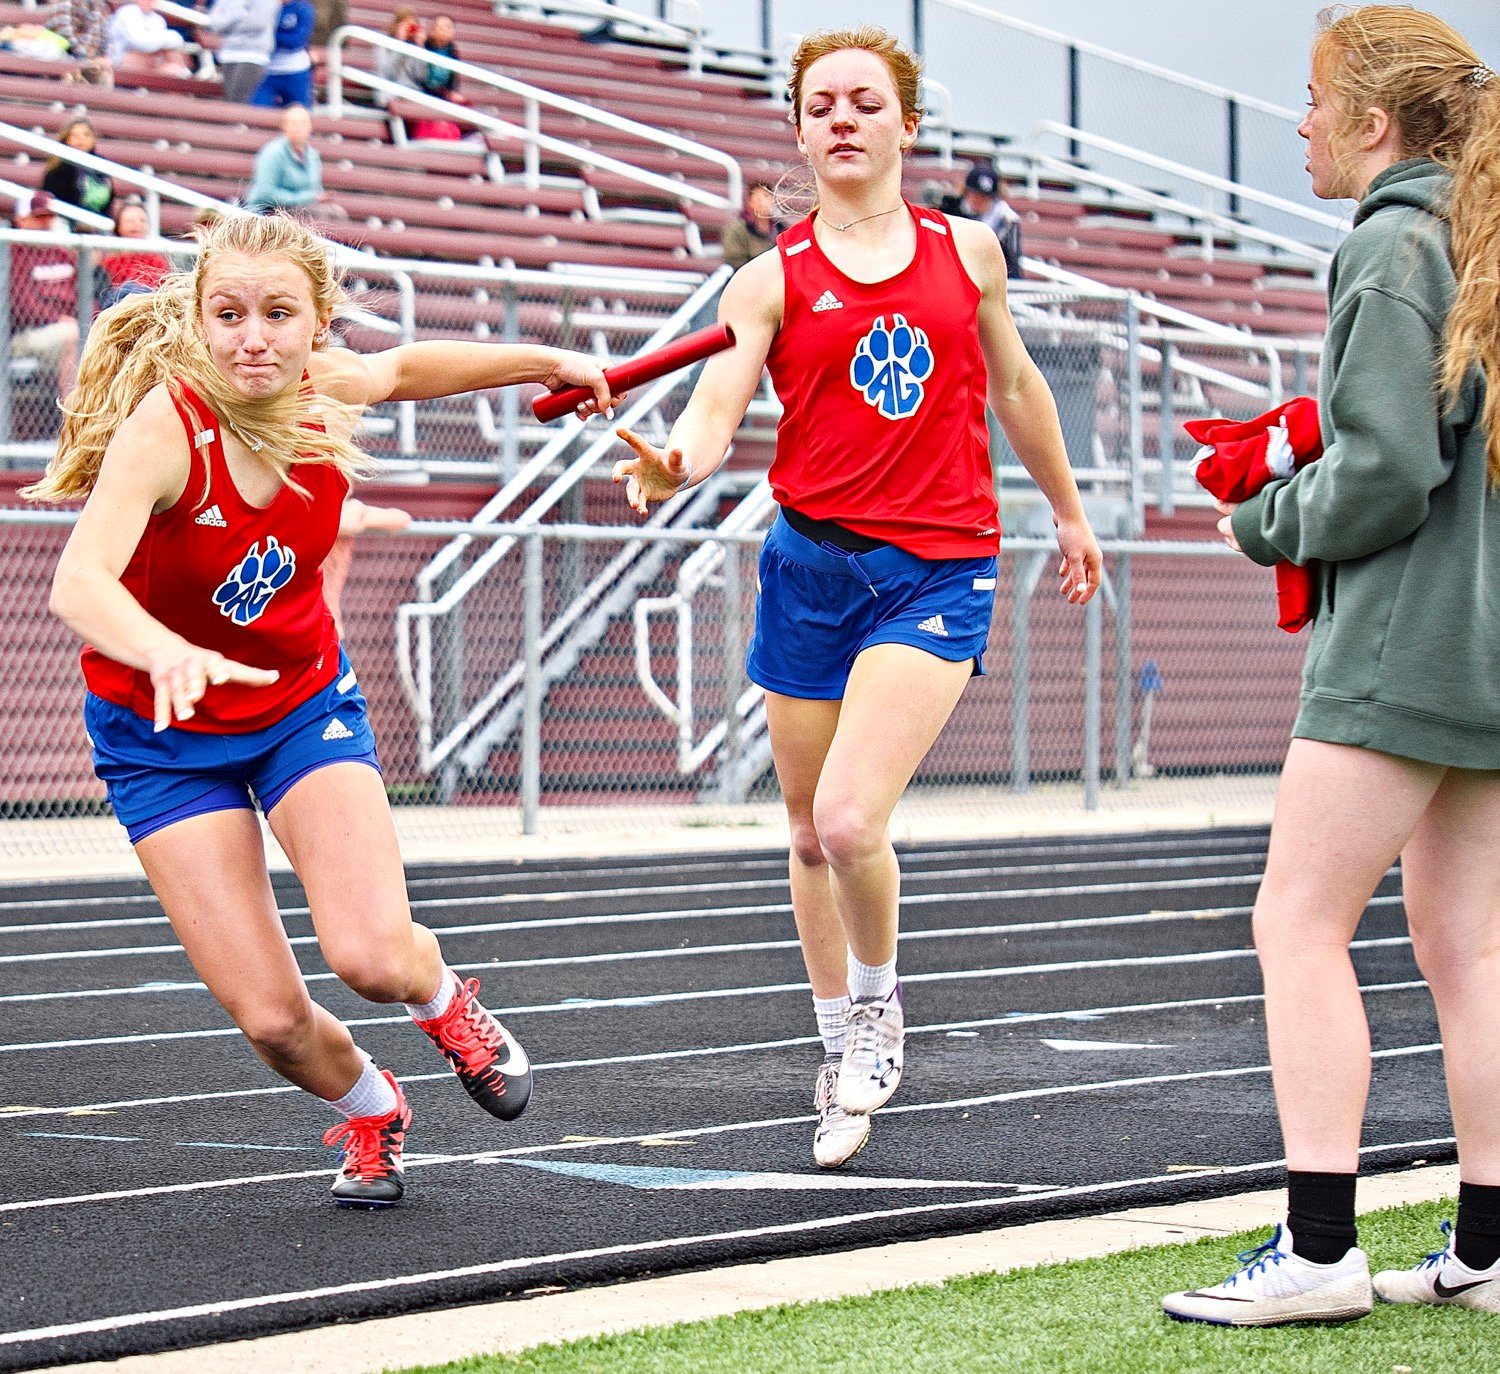 Bella Crawford takes the baton from Cacie Lennon for the third leg of the 4x400 meter relay as Gracie Teel prepares to anchor the race. [more shutter speed]